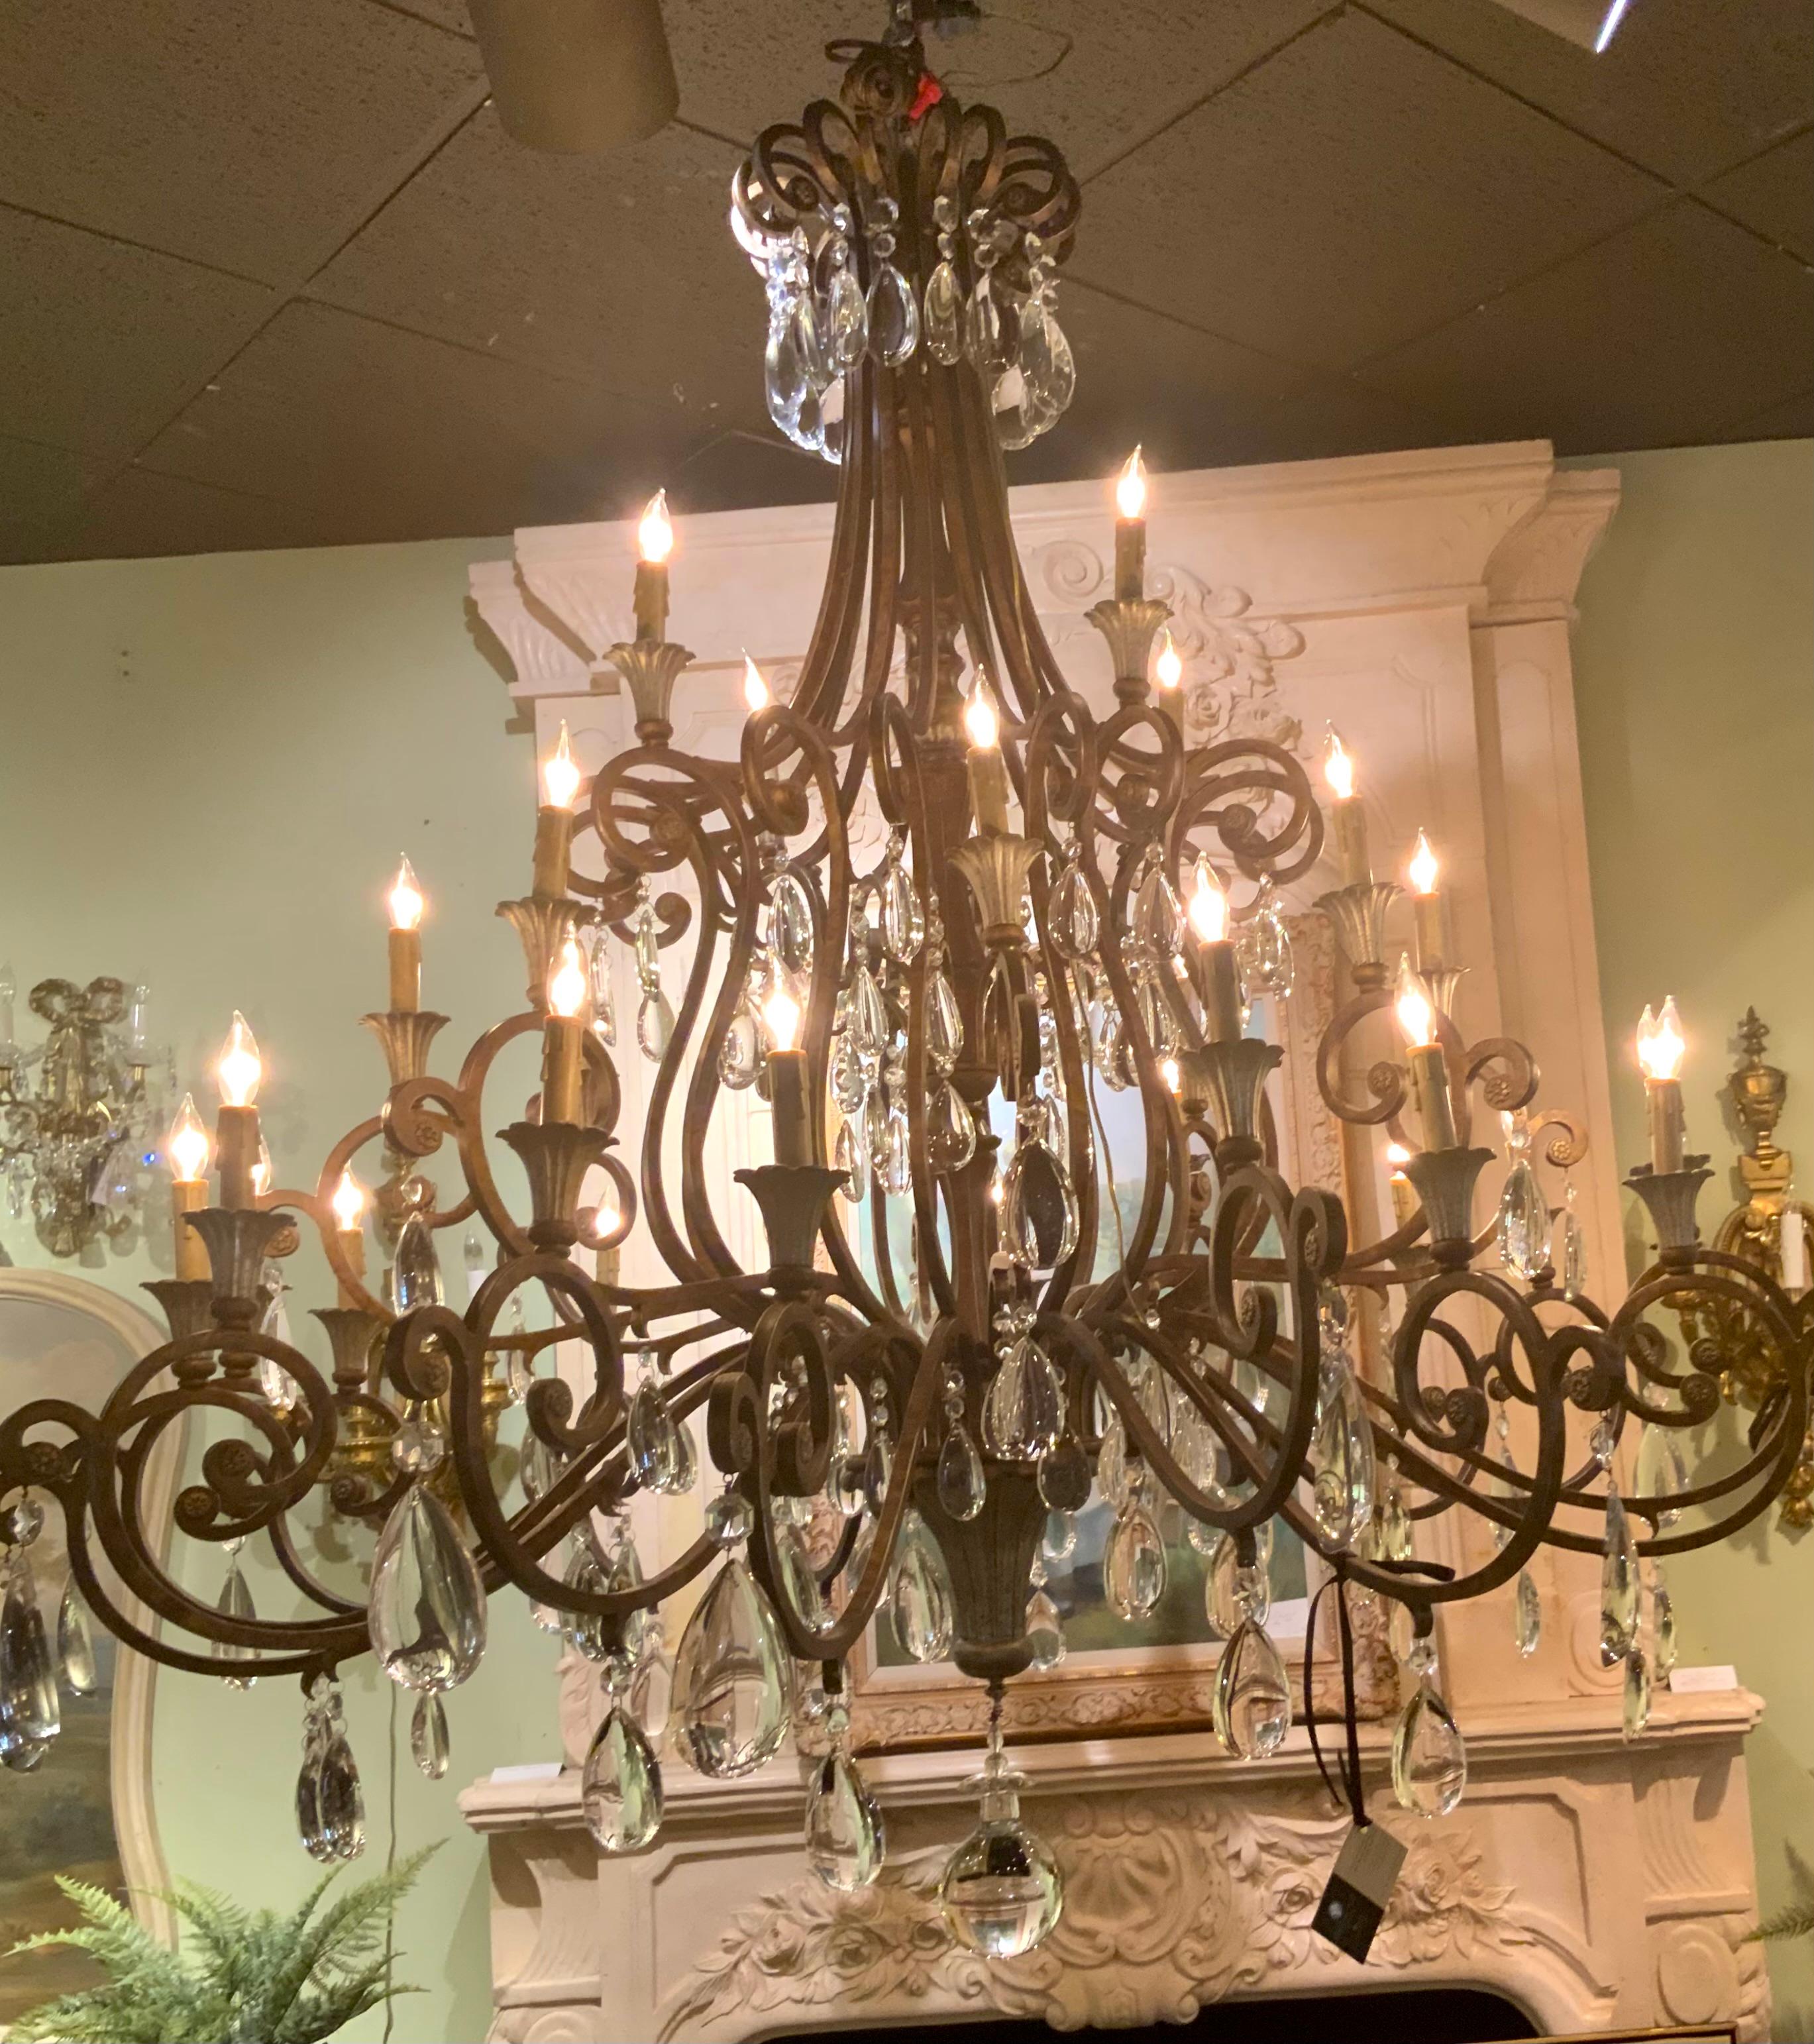 Large scrolling arms that are graceful with twenty nine lights illuminate this fixture. Silver highlights adorn the bottom
Portion of this chandelier and silver highlights also decorate
The cup portion of each light. It is large in scale and